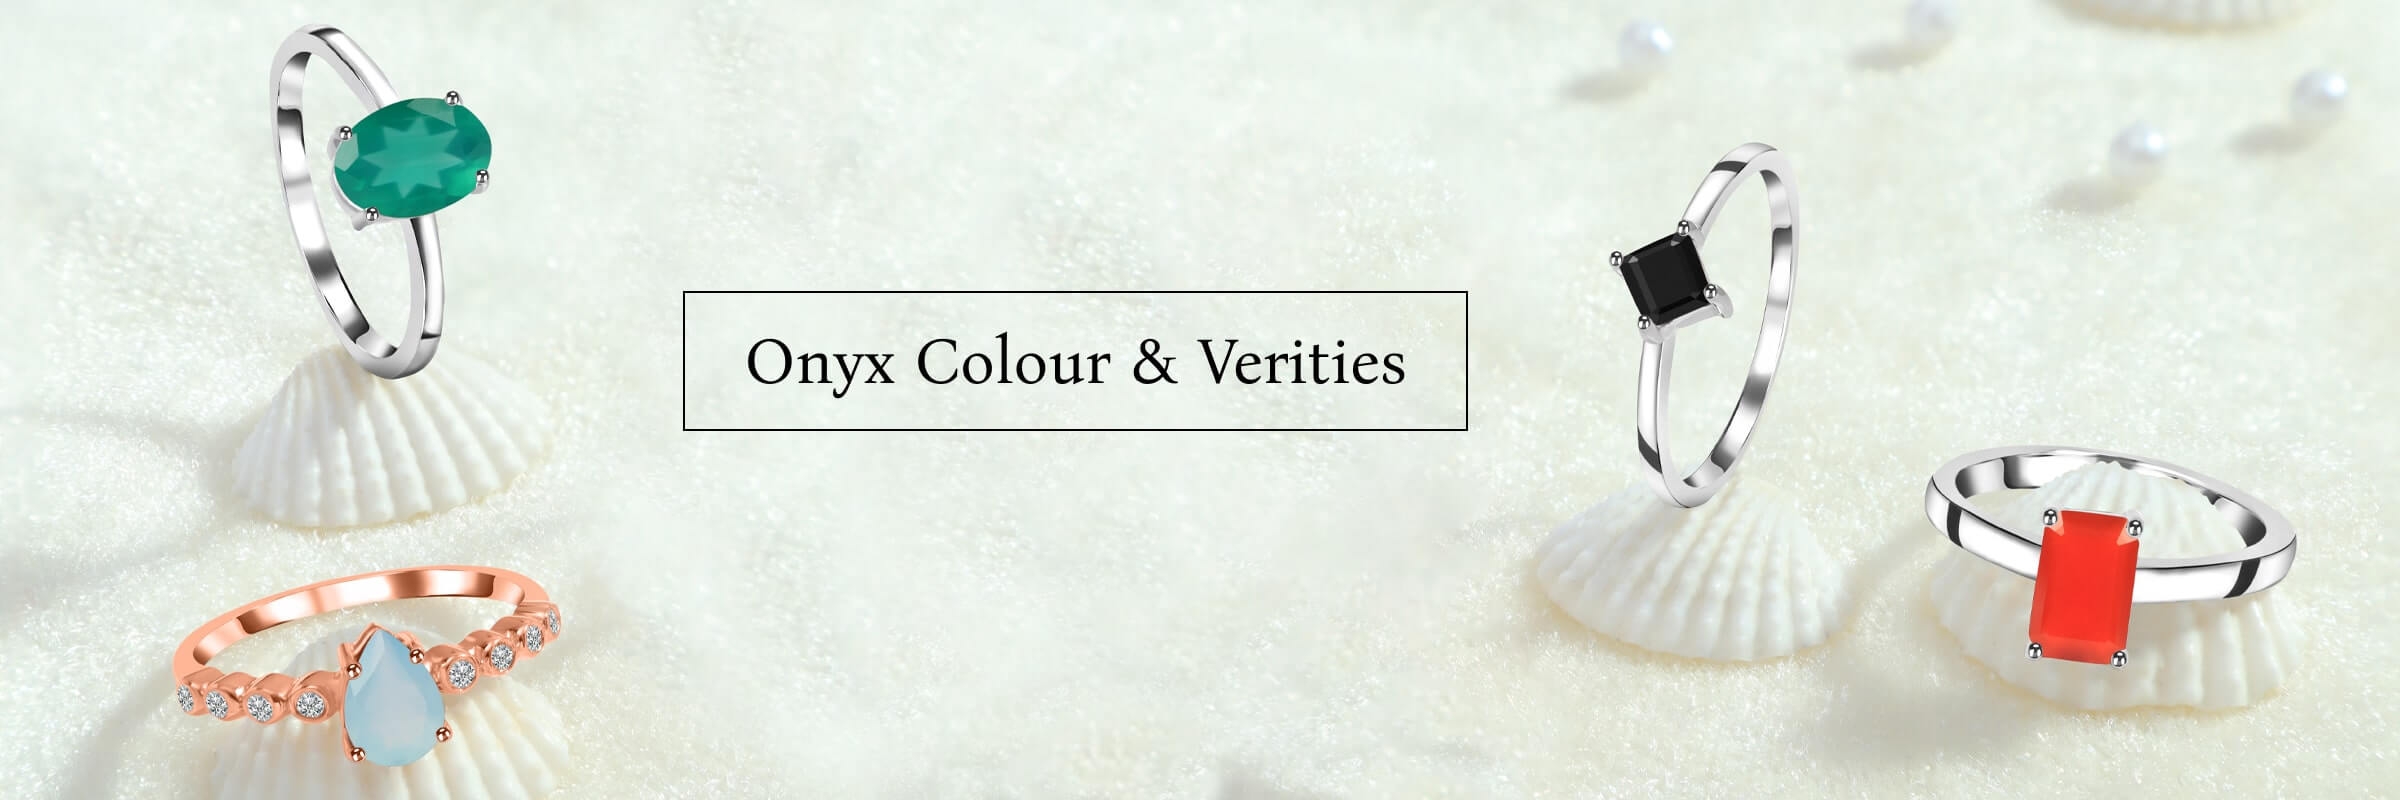 colours and Types of onyx